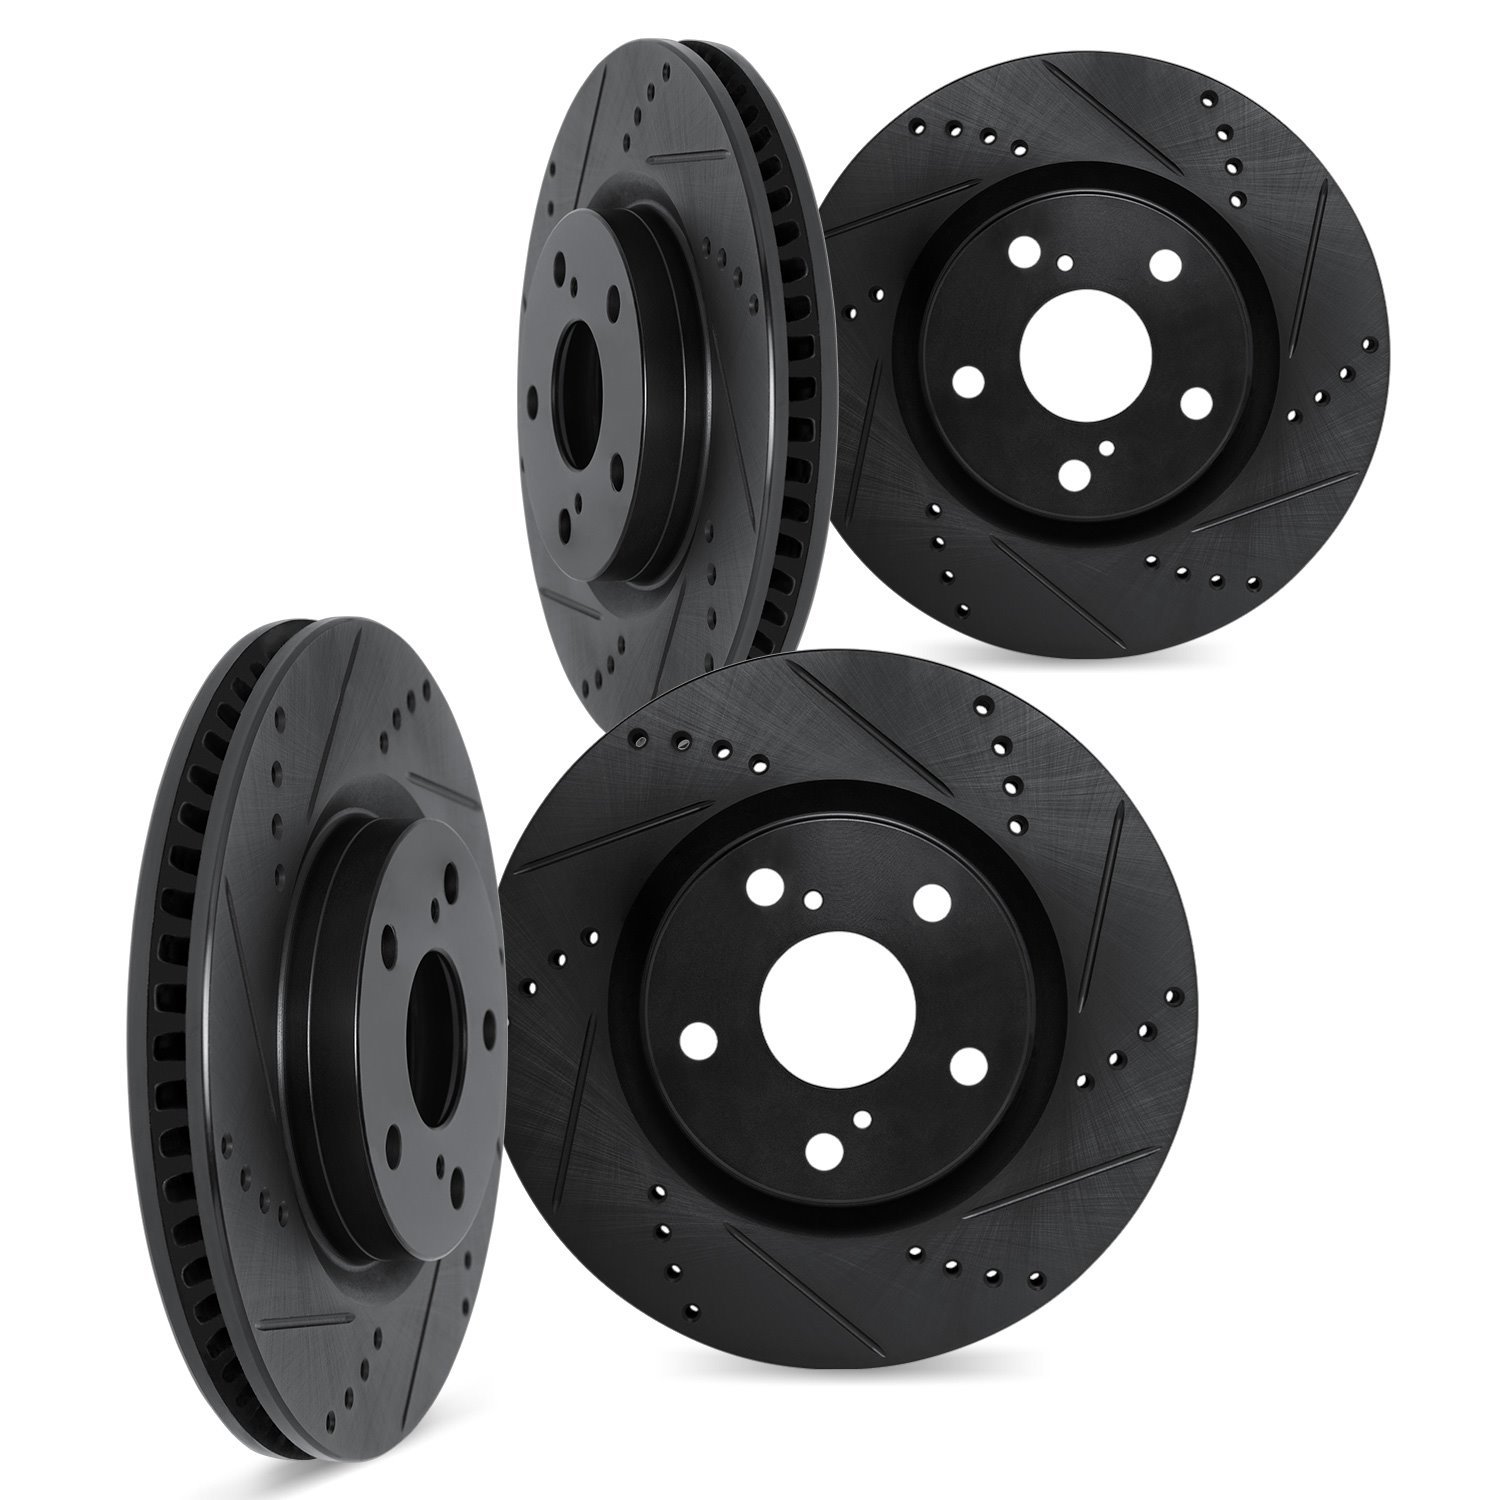 8004-31043 Drilled/Slotted Brake Rotors [Black], 2004-2010 BMW, Position: Front and Rear